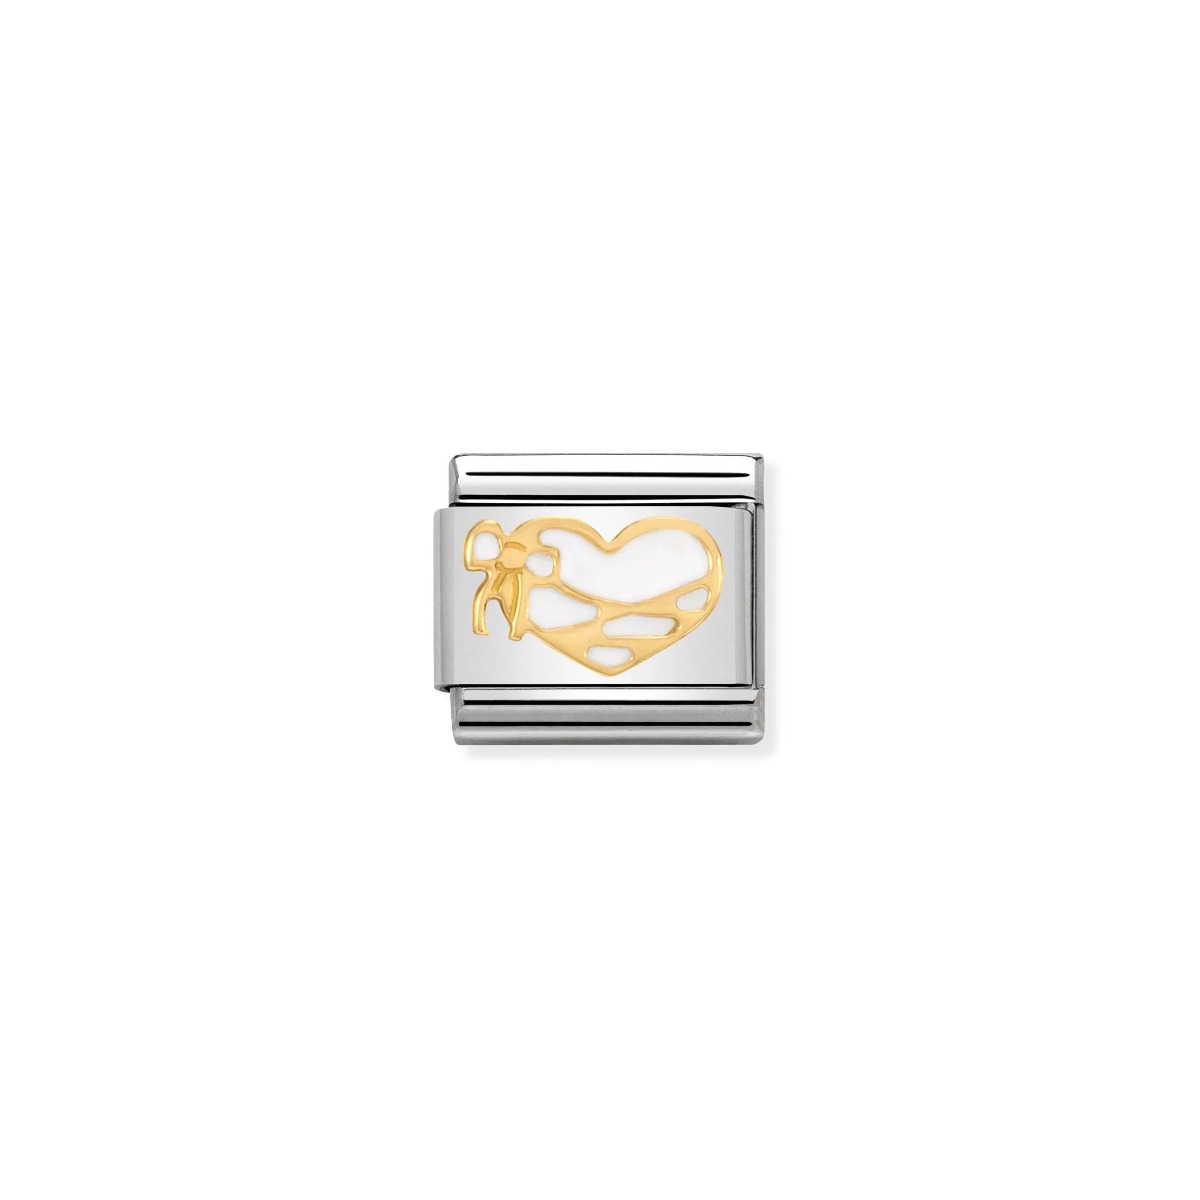 Nomination Classic Gold and White Enamel Bound Heart 030253_44